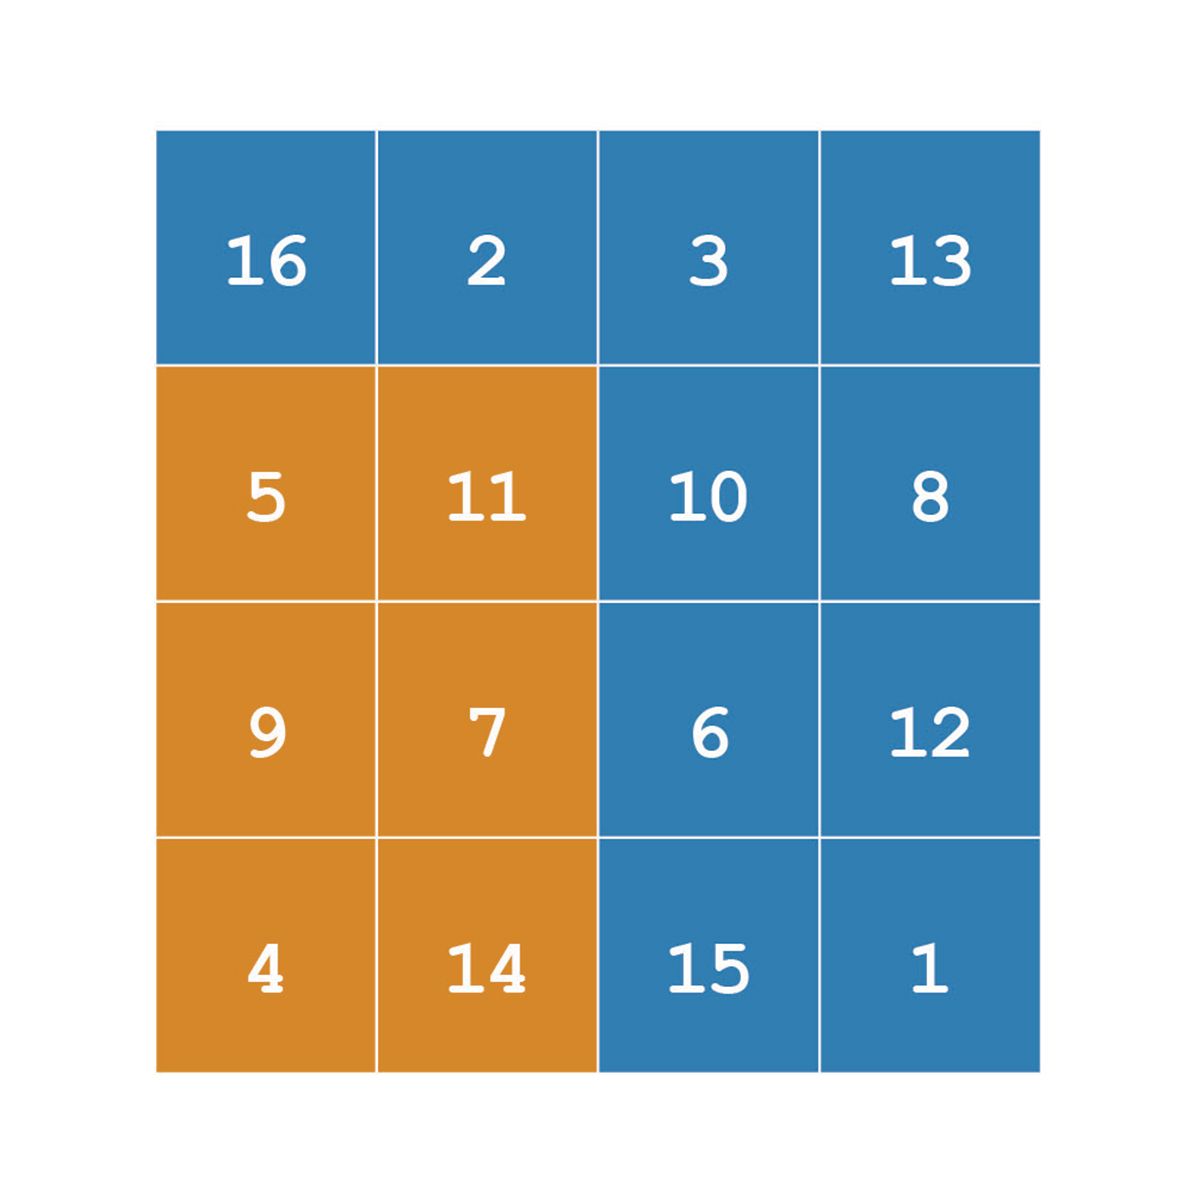 4x4 matrix with highlighted values in rows 2 through 4 and columns 1 through 2. 